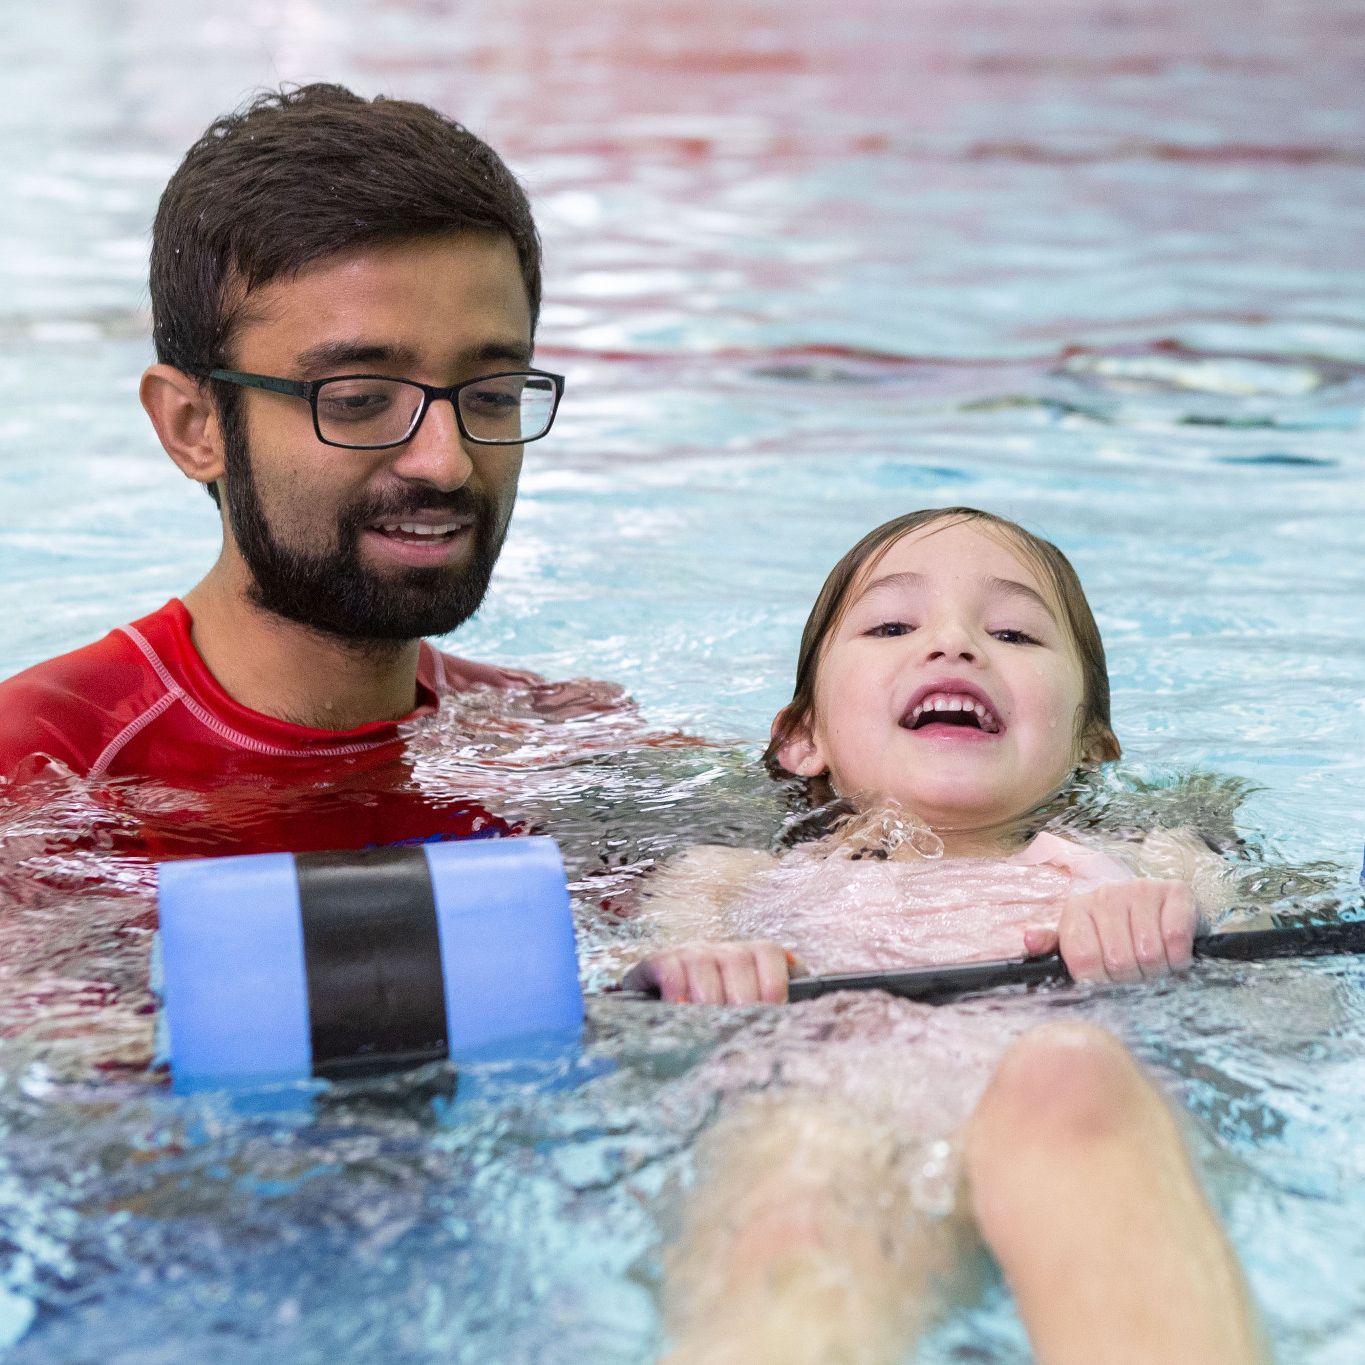 A swim student receives instruction using a floating device